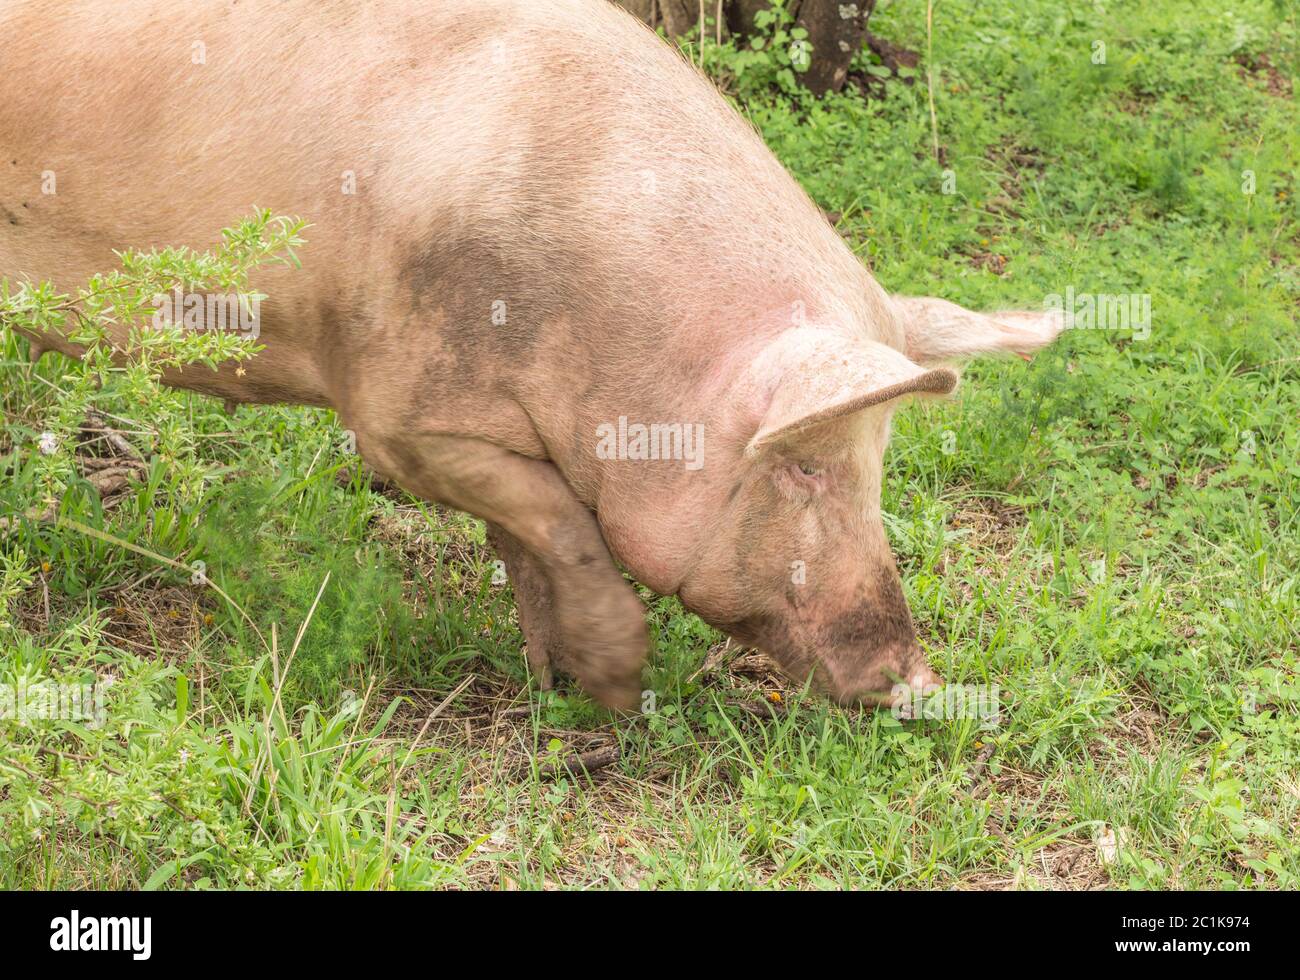 Pig digging in grassy soil - Pig rooting for food Stock Photo